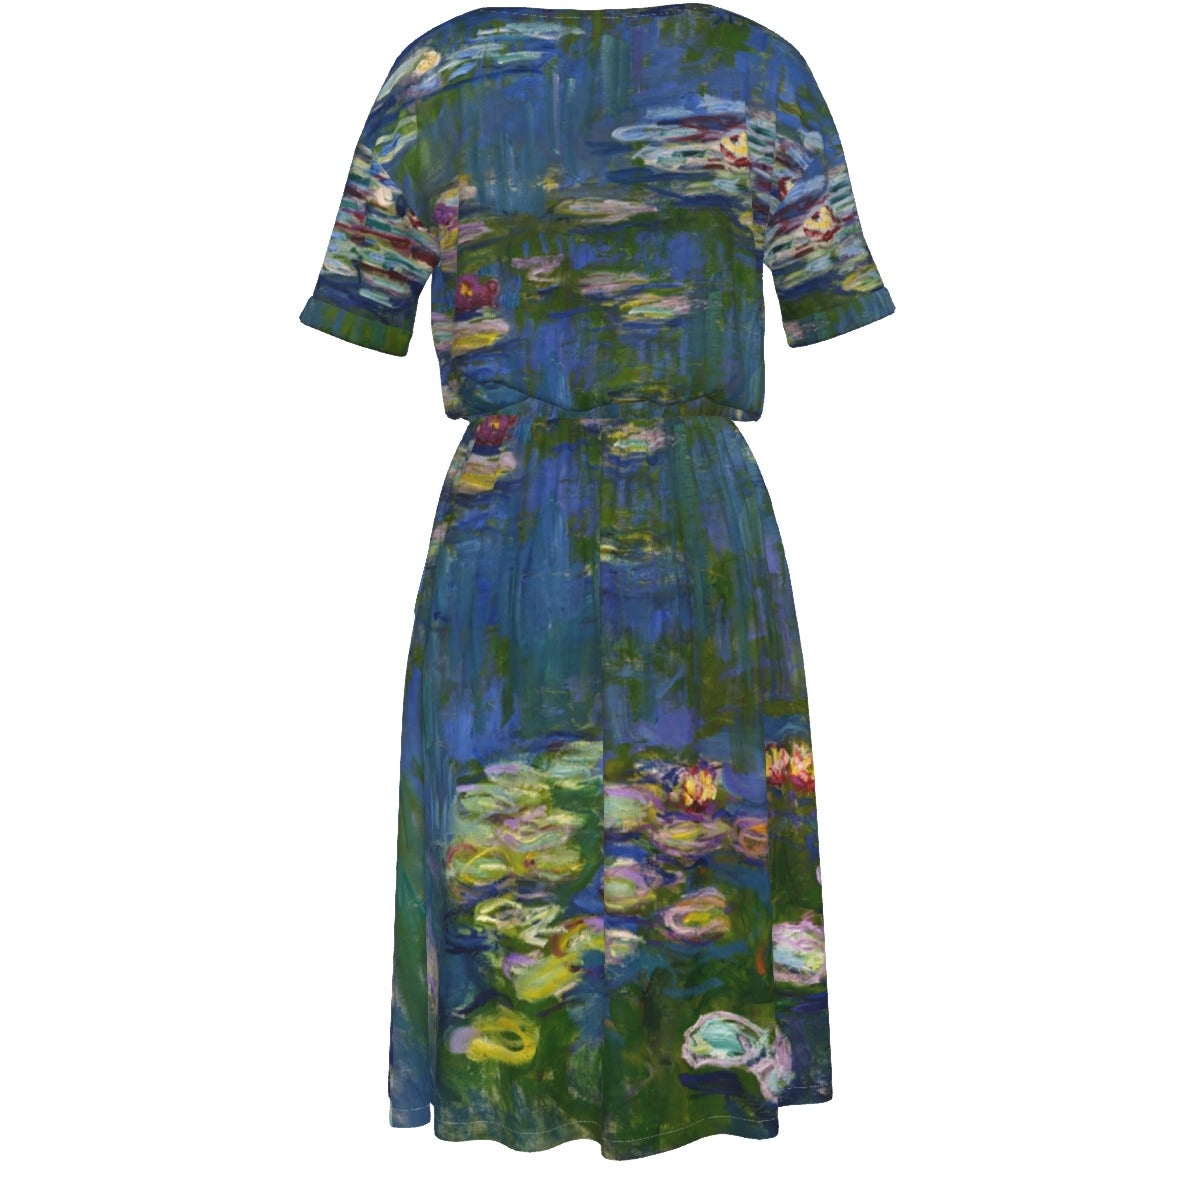 Floral-patterned waist dress with artistic flair